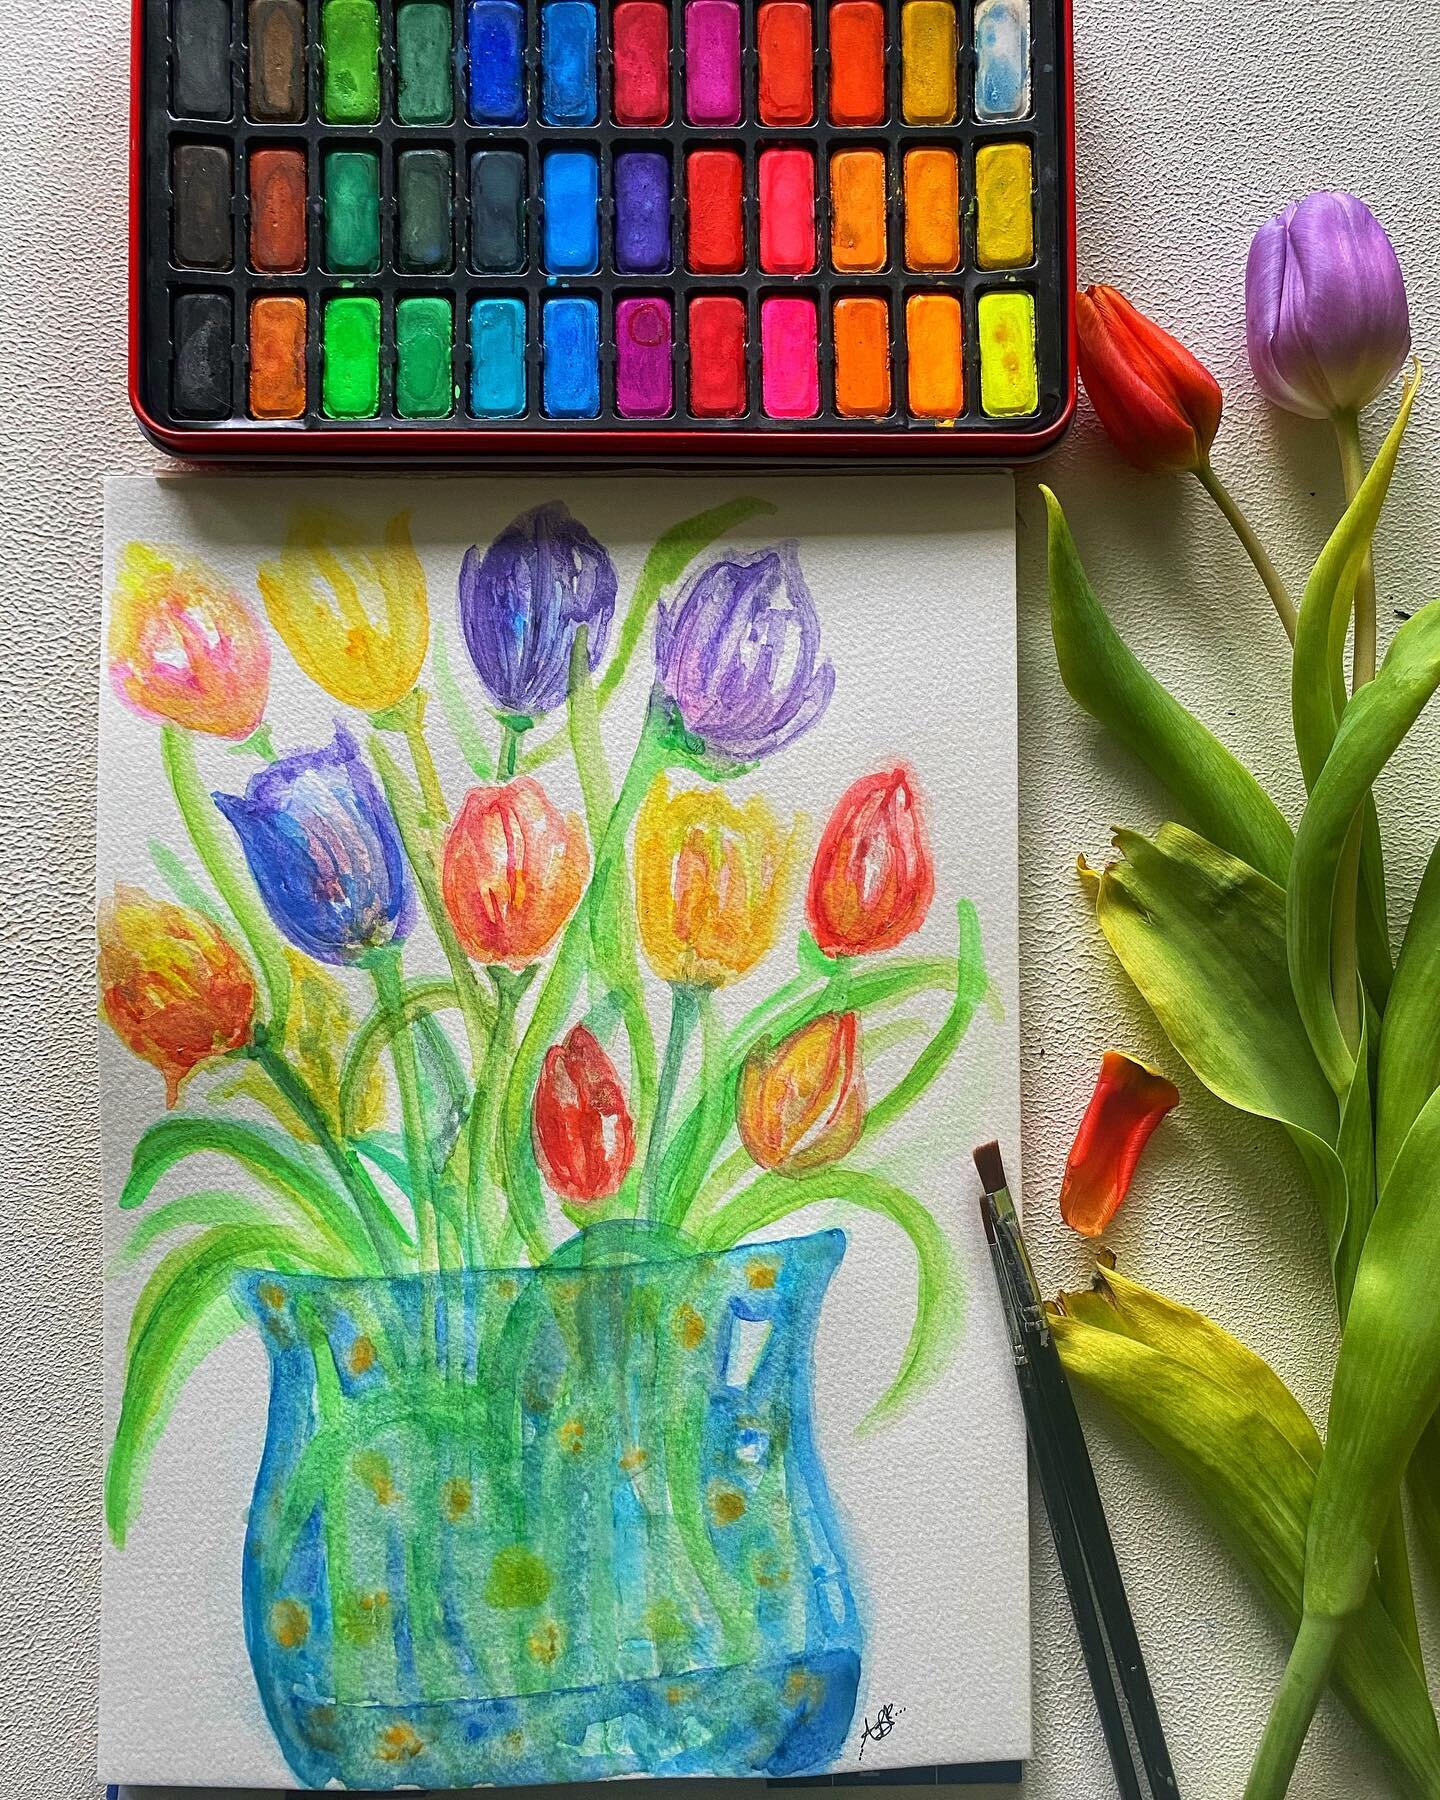 &ldquo;Treasure Tulips&rdquo; (2021) Thoroughly enjoyed painting this watercolour study of my tulip 💐 🌷 bunch. A splash of colour to make your Wednesday! 💕
.
.
 #watercolours #ashebickillustrations #quirkyart #tulips #tulippainting #artist #illust